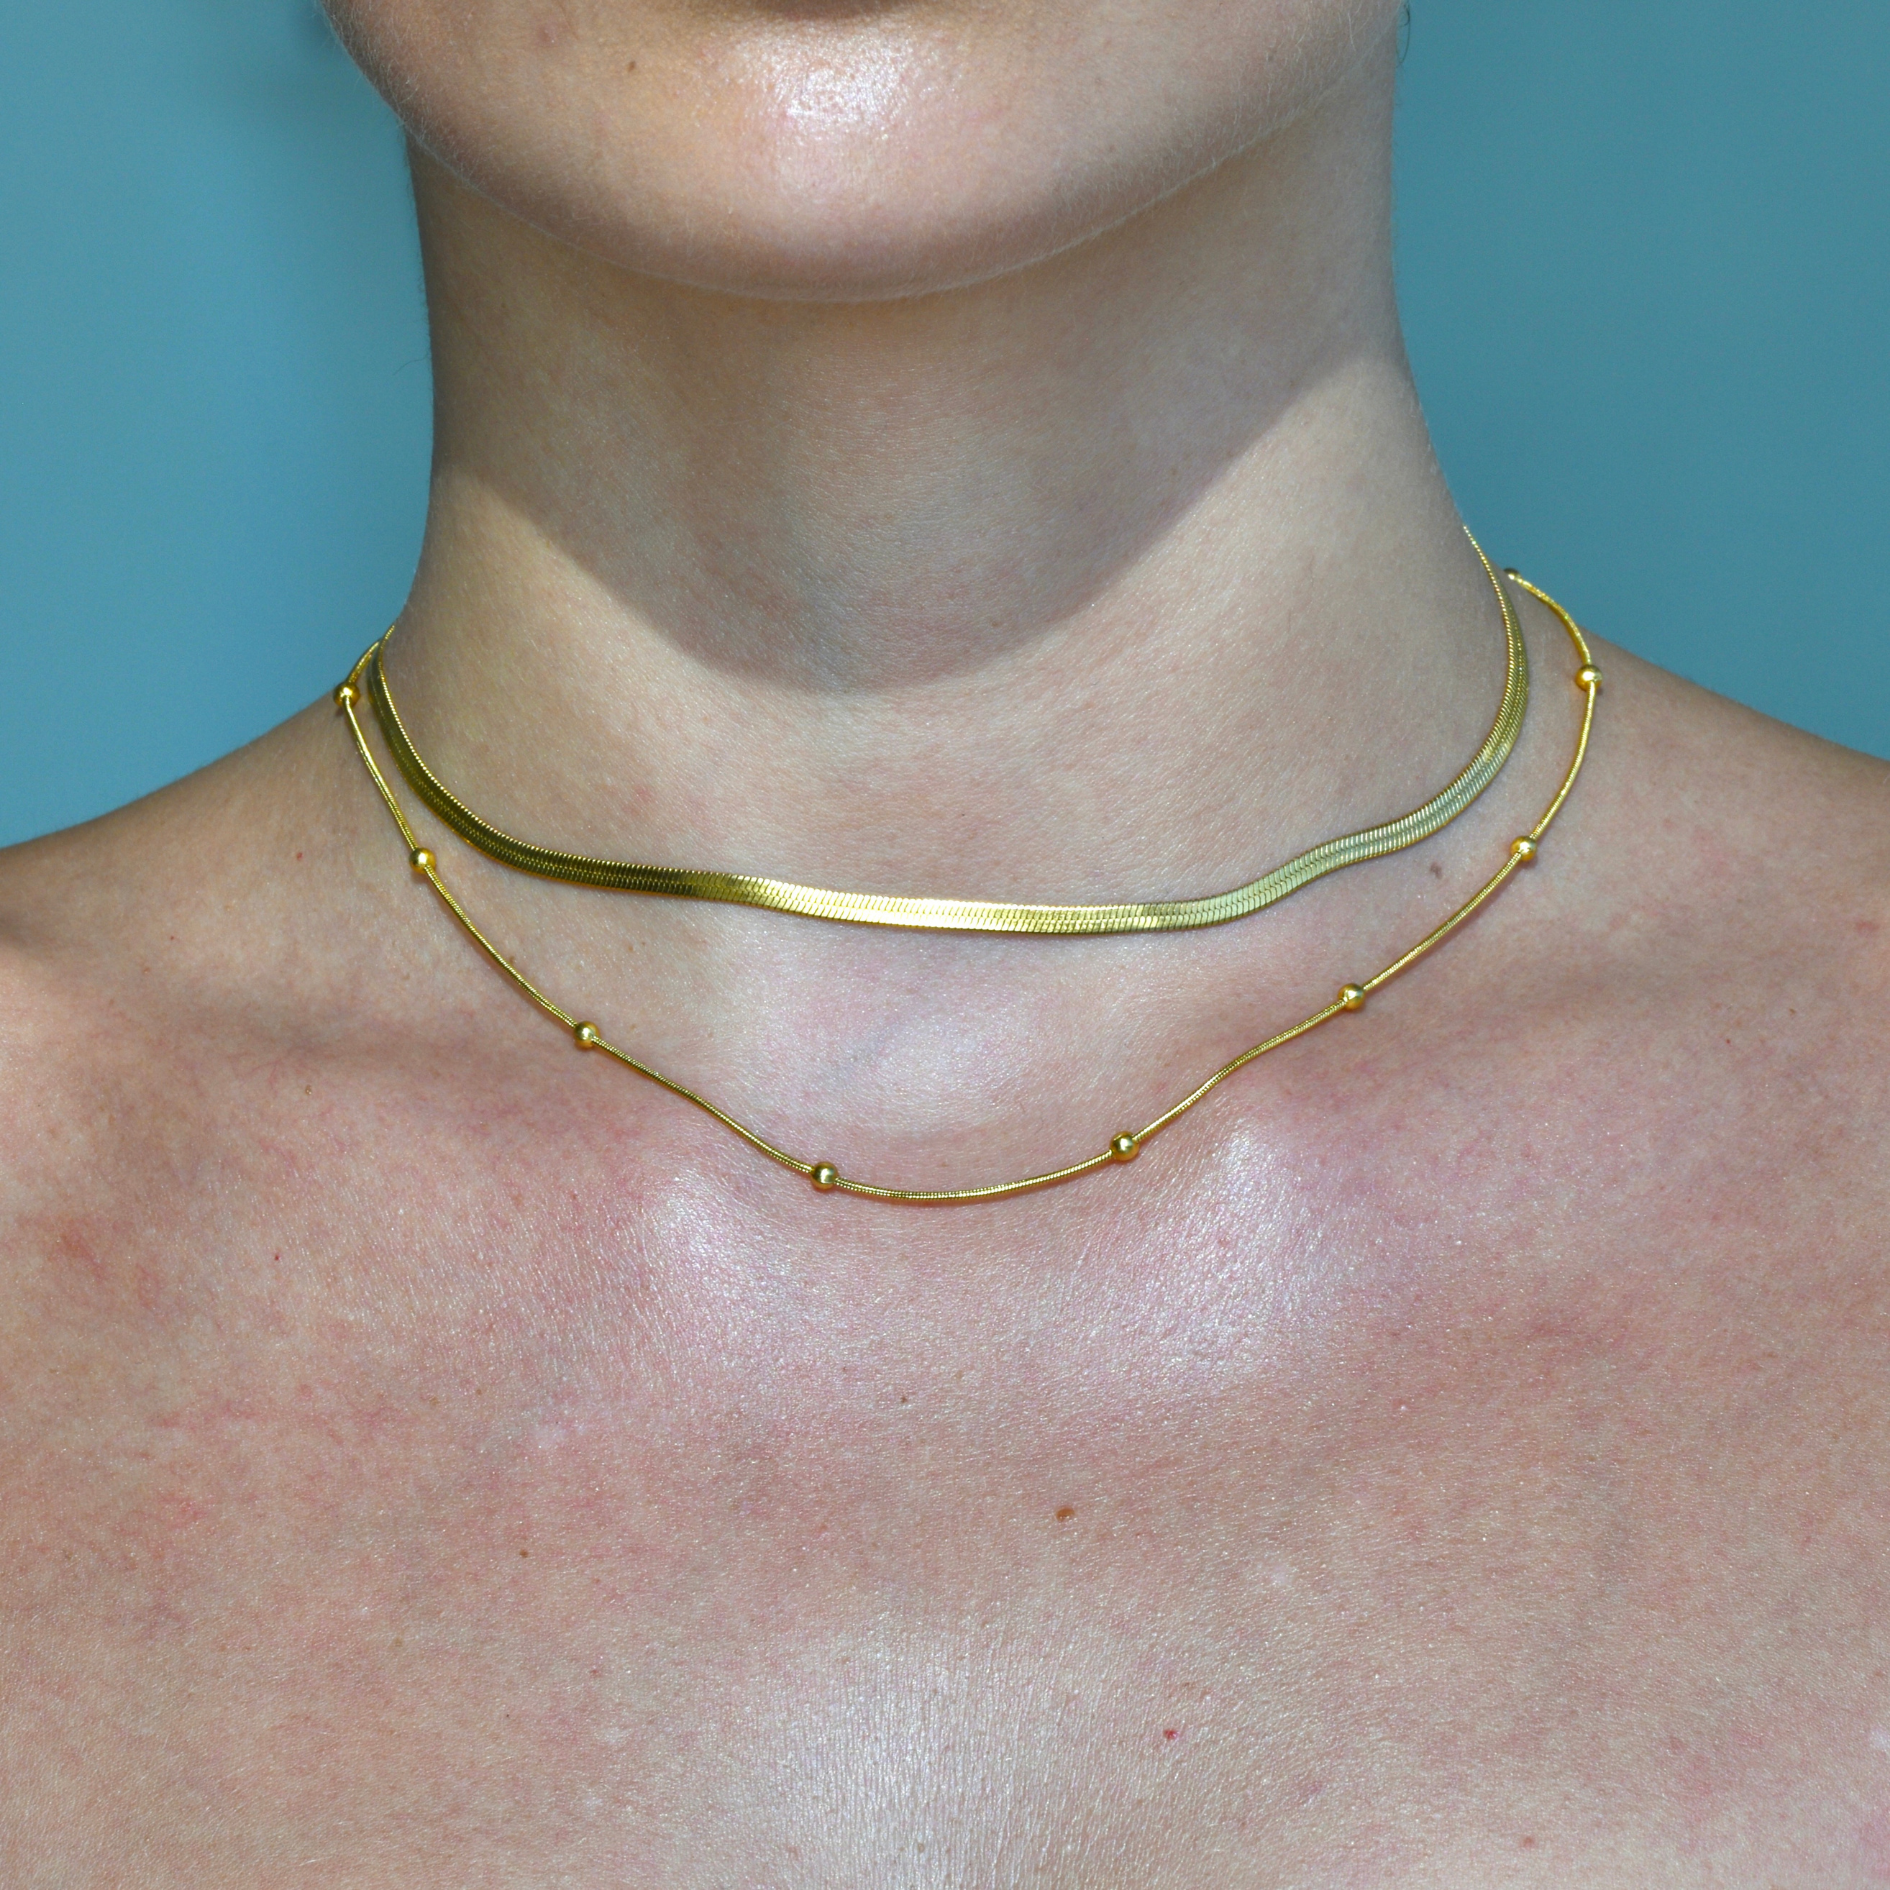 Two necklaces in one. One Dainty gold plated waterproof necklace and one goldplated herrringbone choker.DUA Gold Dainty Snake Choker.